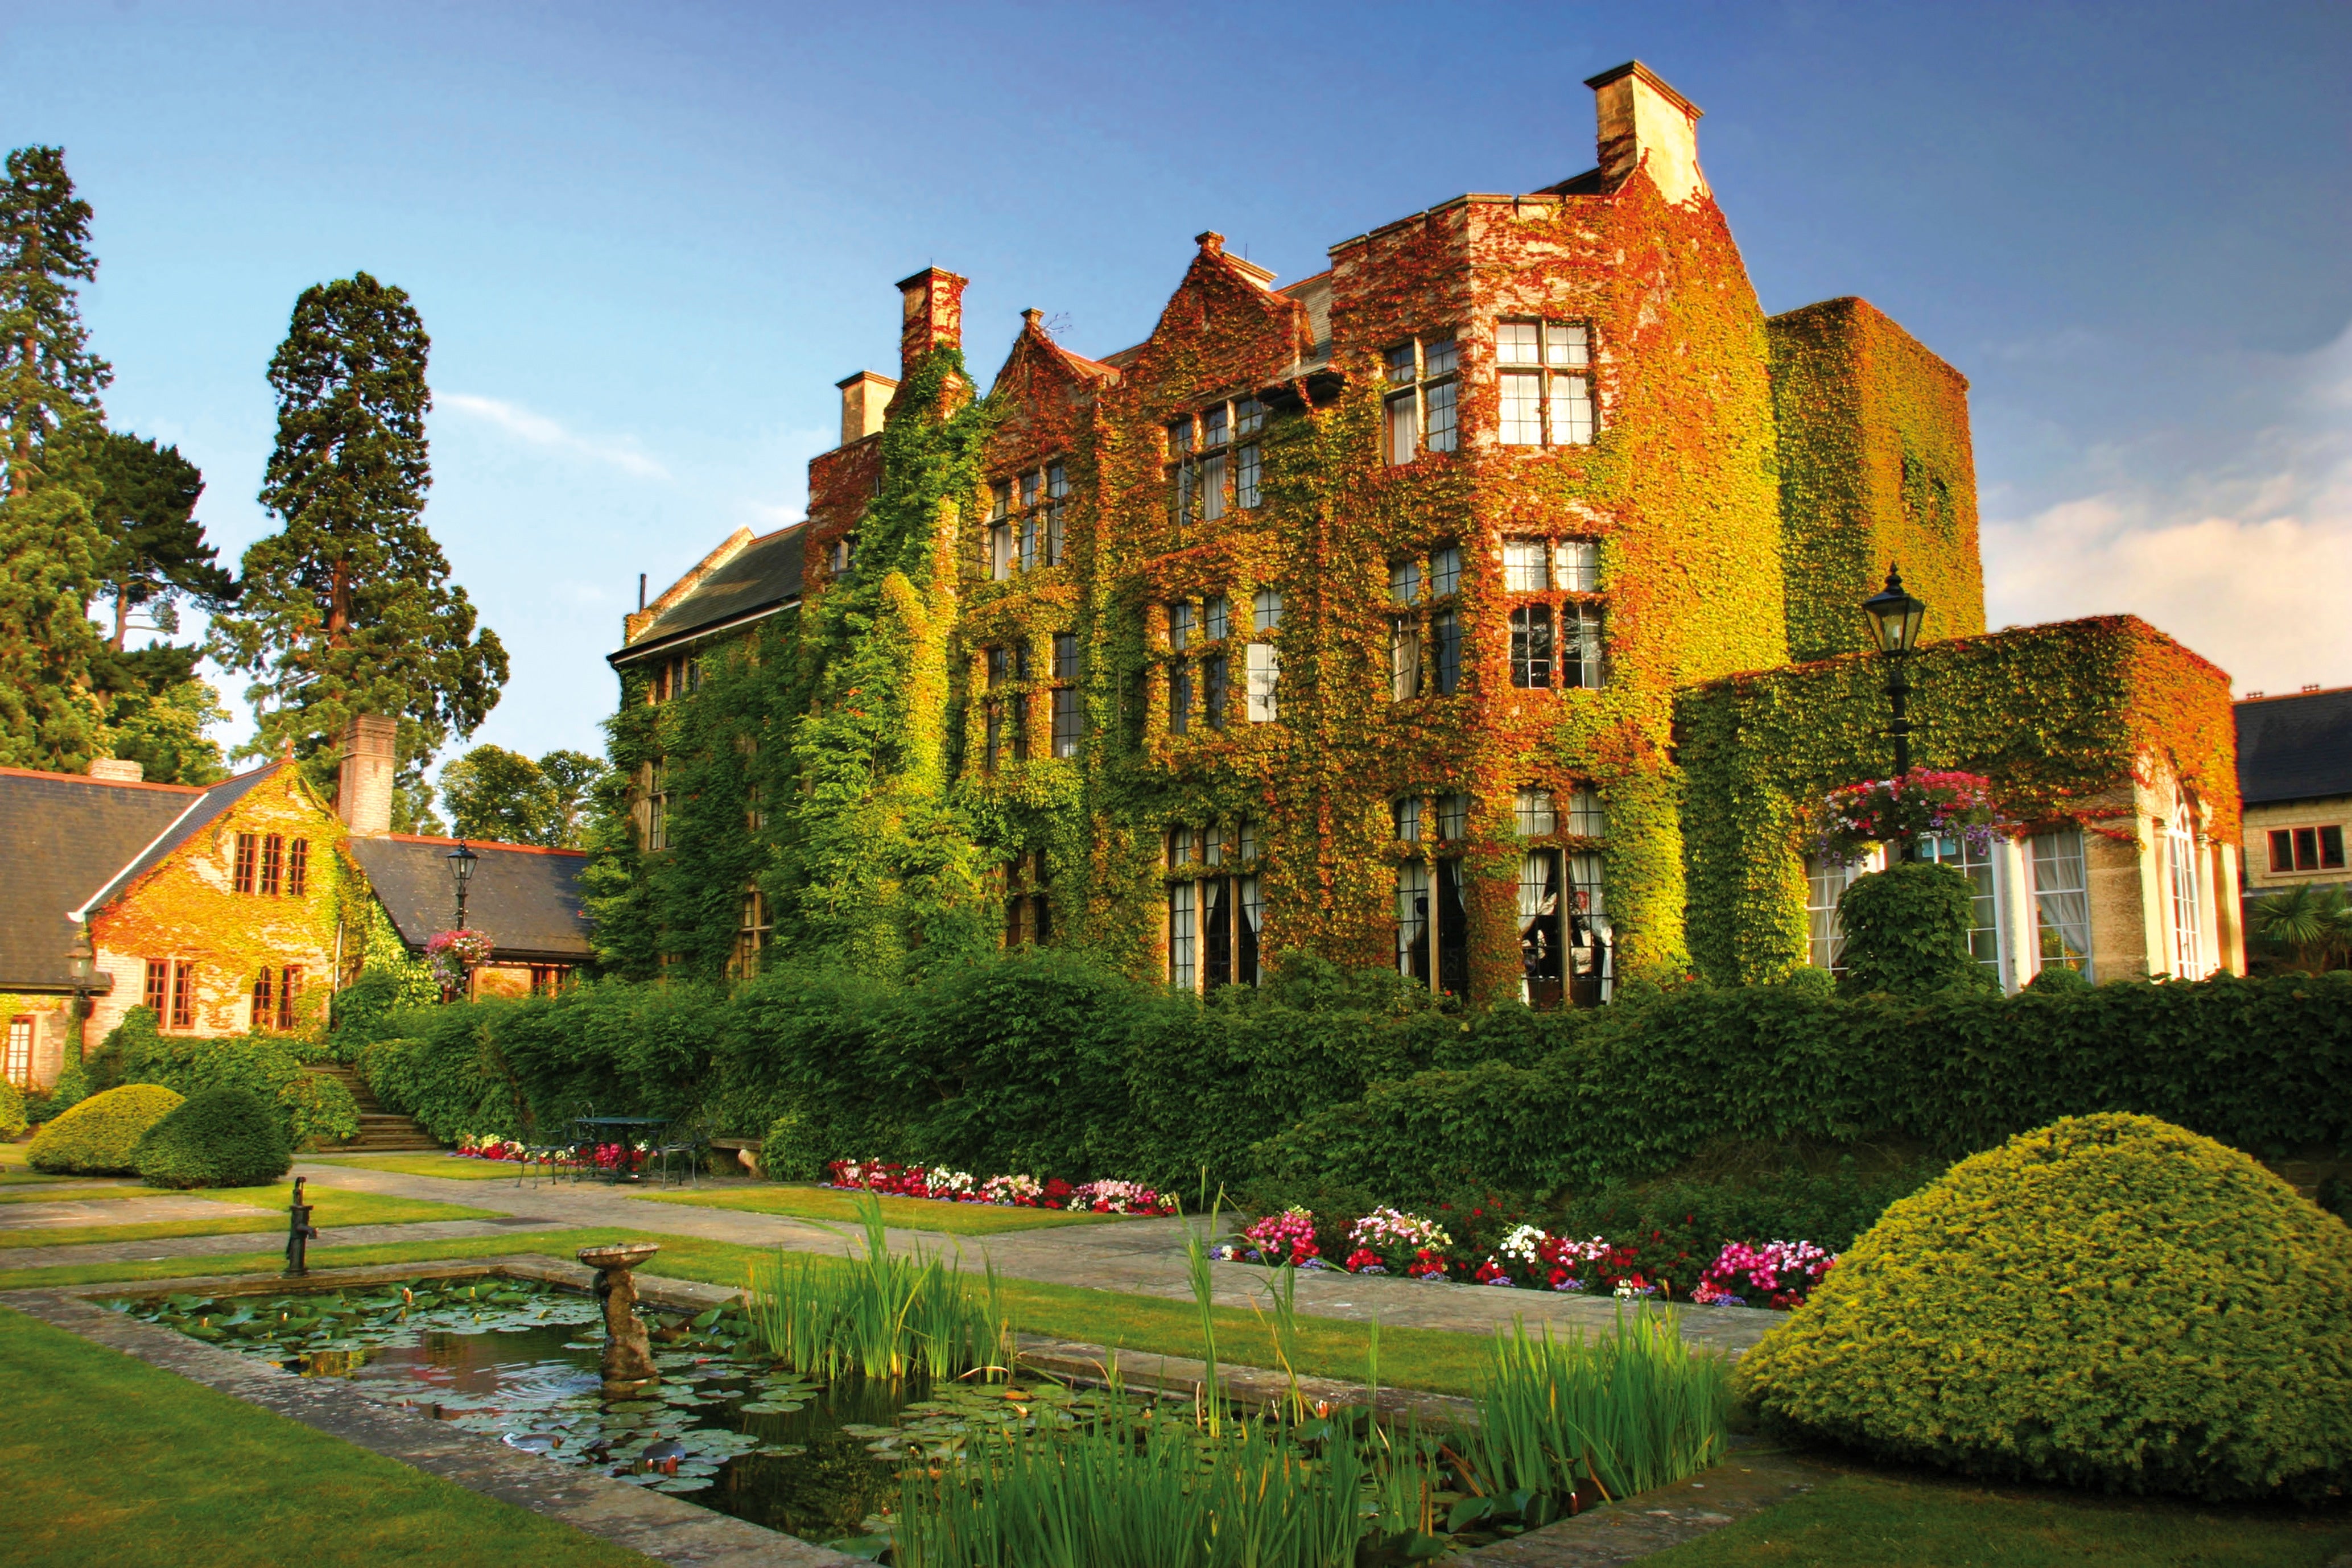 Stay at Pennyhill Park for an 18th-century experience